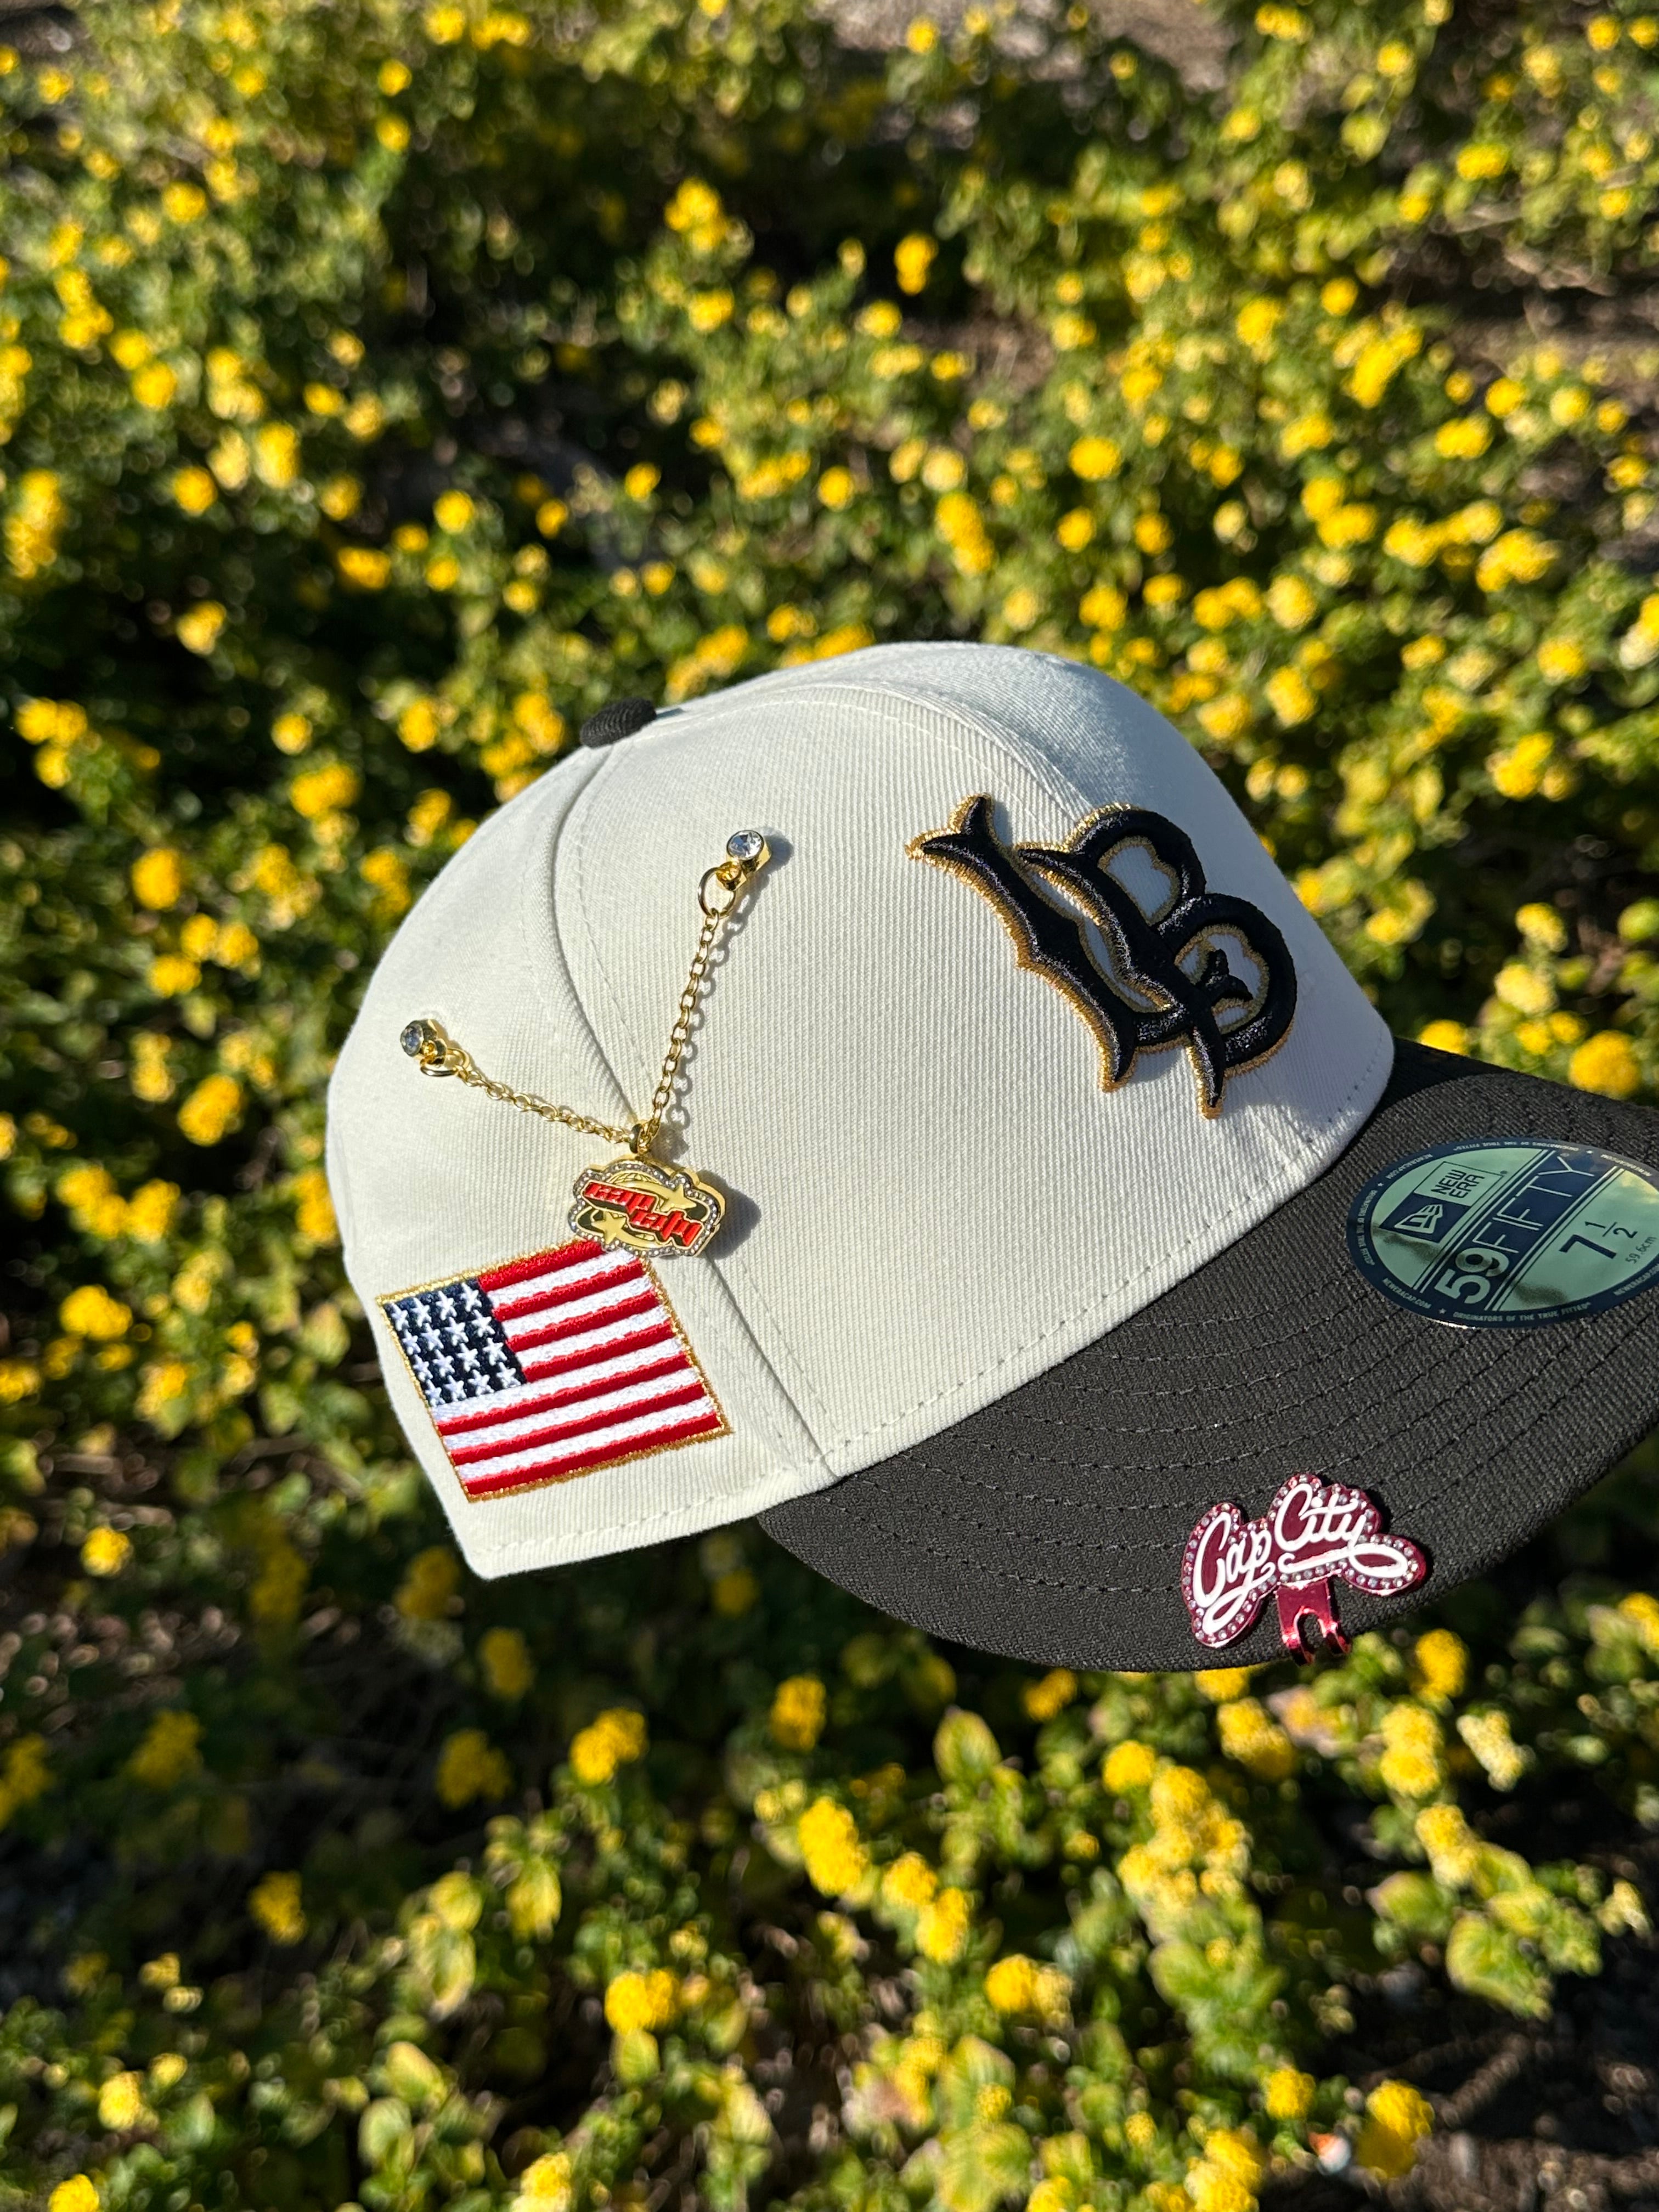 NEW ERA EXCLUSIVE 59FIFTY CHROME WHITE/BLACK "LONG BEACH STATE" W/ AMERICAN FLAG SIDE PATCH